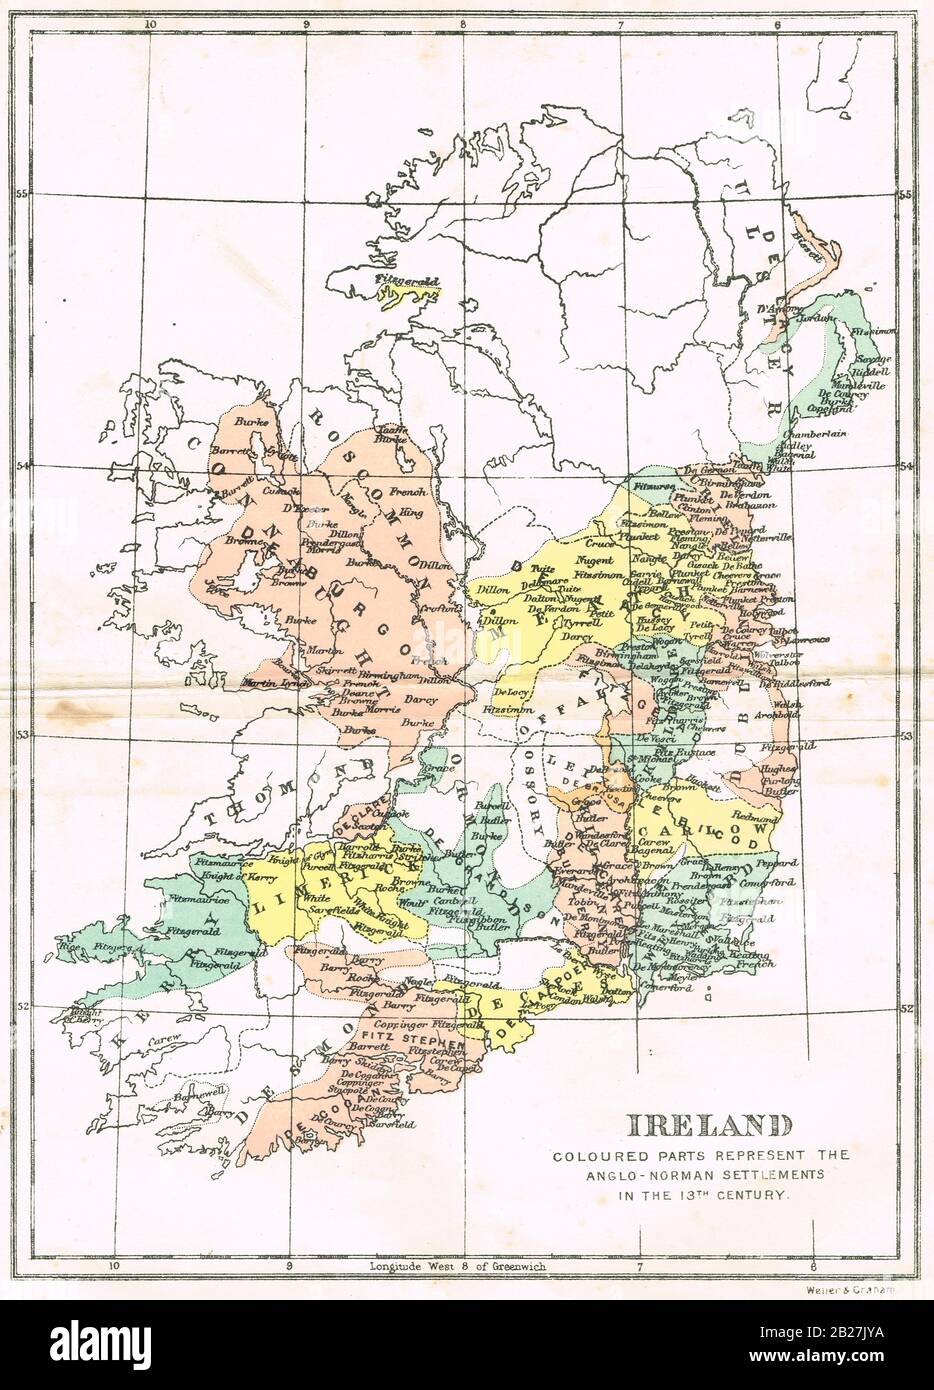 Map of Ireland,at the period of Anglo Norman setllements, 13th century Stock Photo